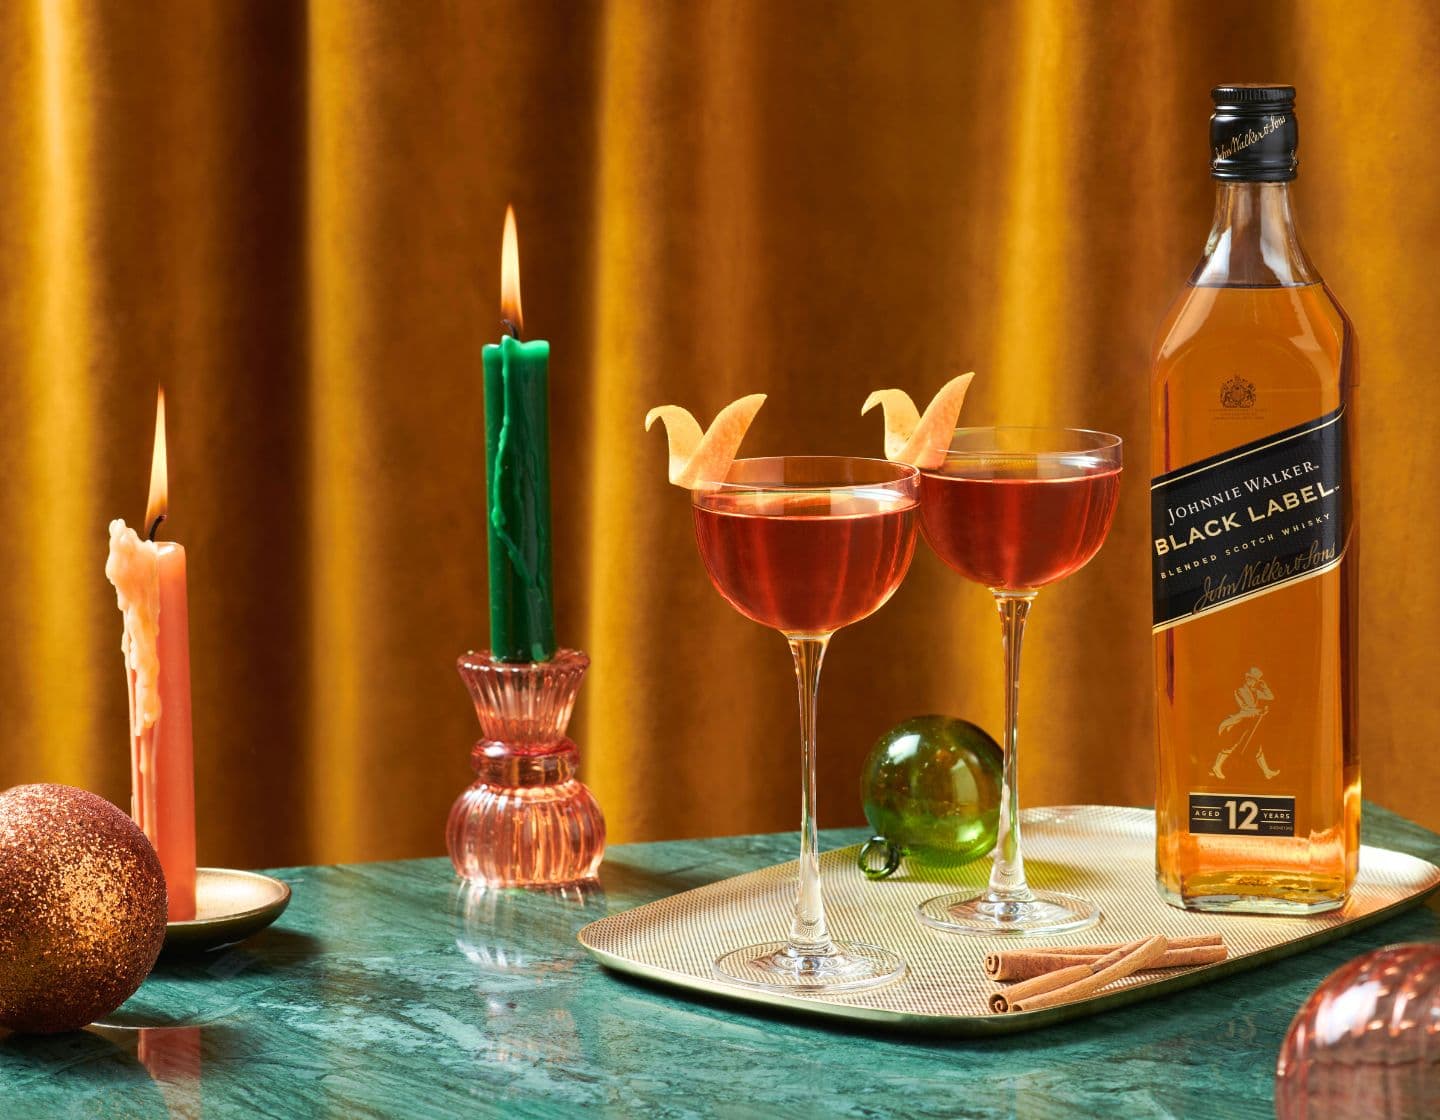 Cocktail in a coupe glass with orange garnish, surrounded by bottle of Johnnie Walker Black Label Whisky, and candles.